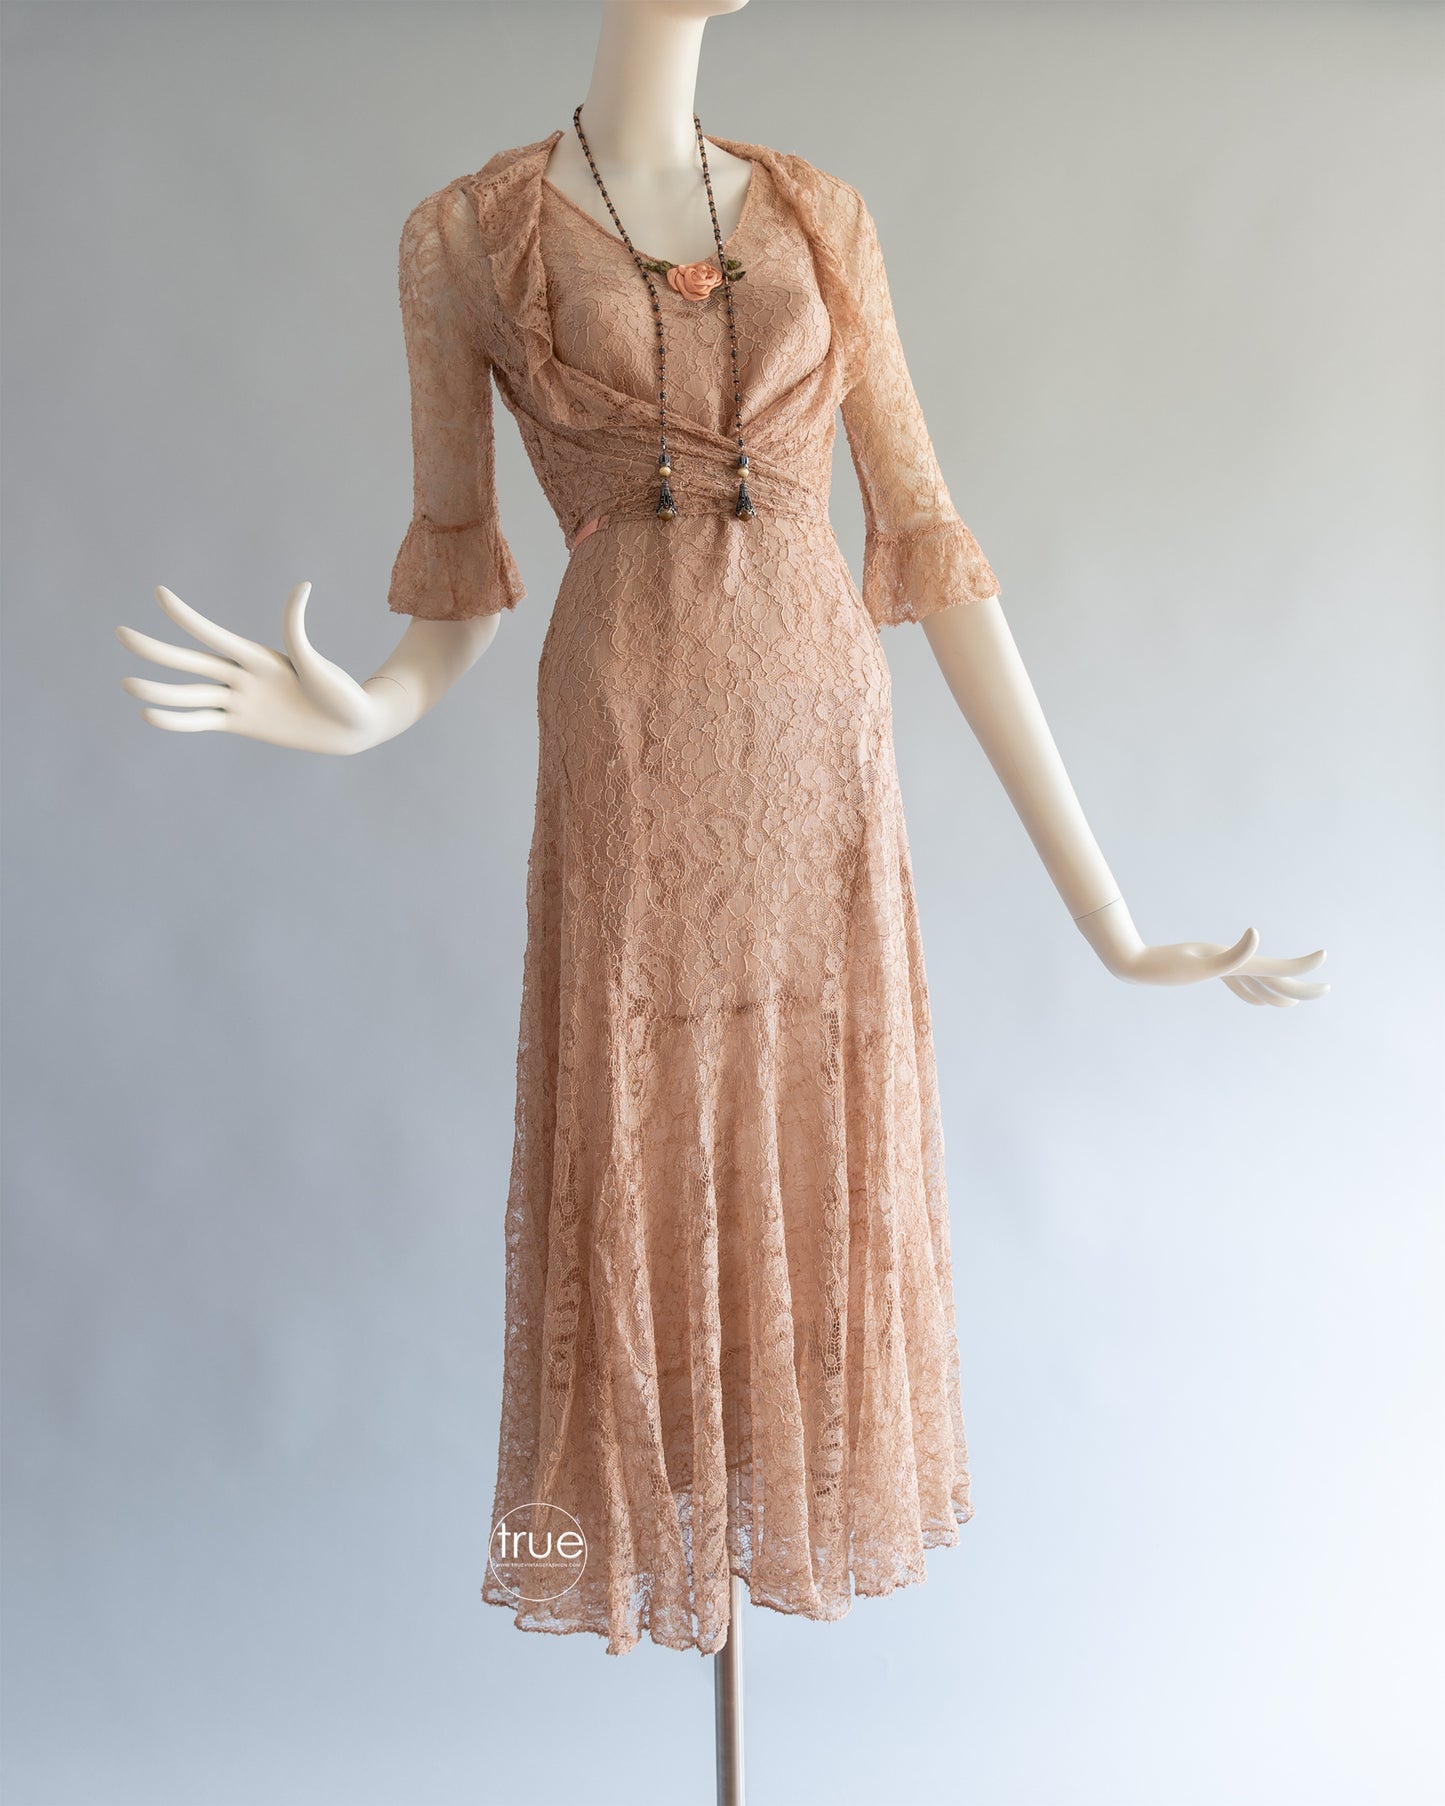 vintage 1920's - 1930's dress ...lovely nude/taupe-ish lace dress with silk flounced slip & jacket